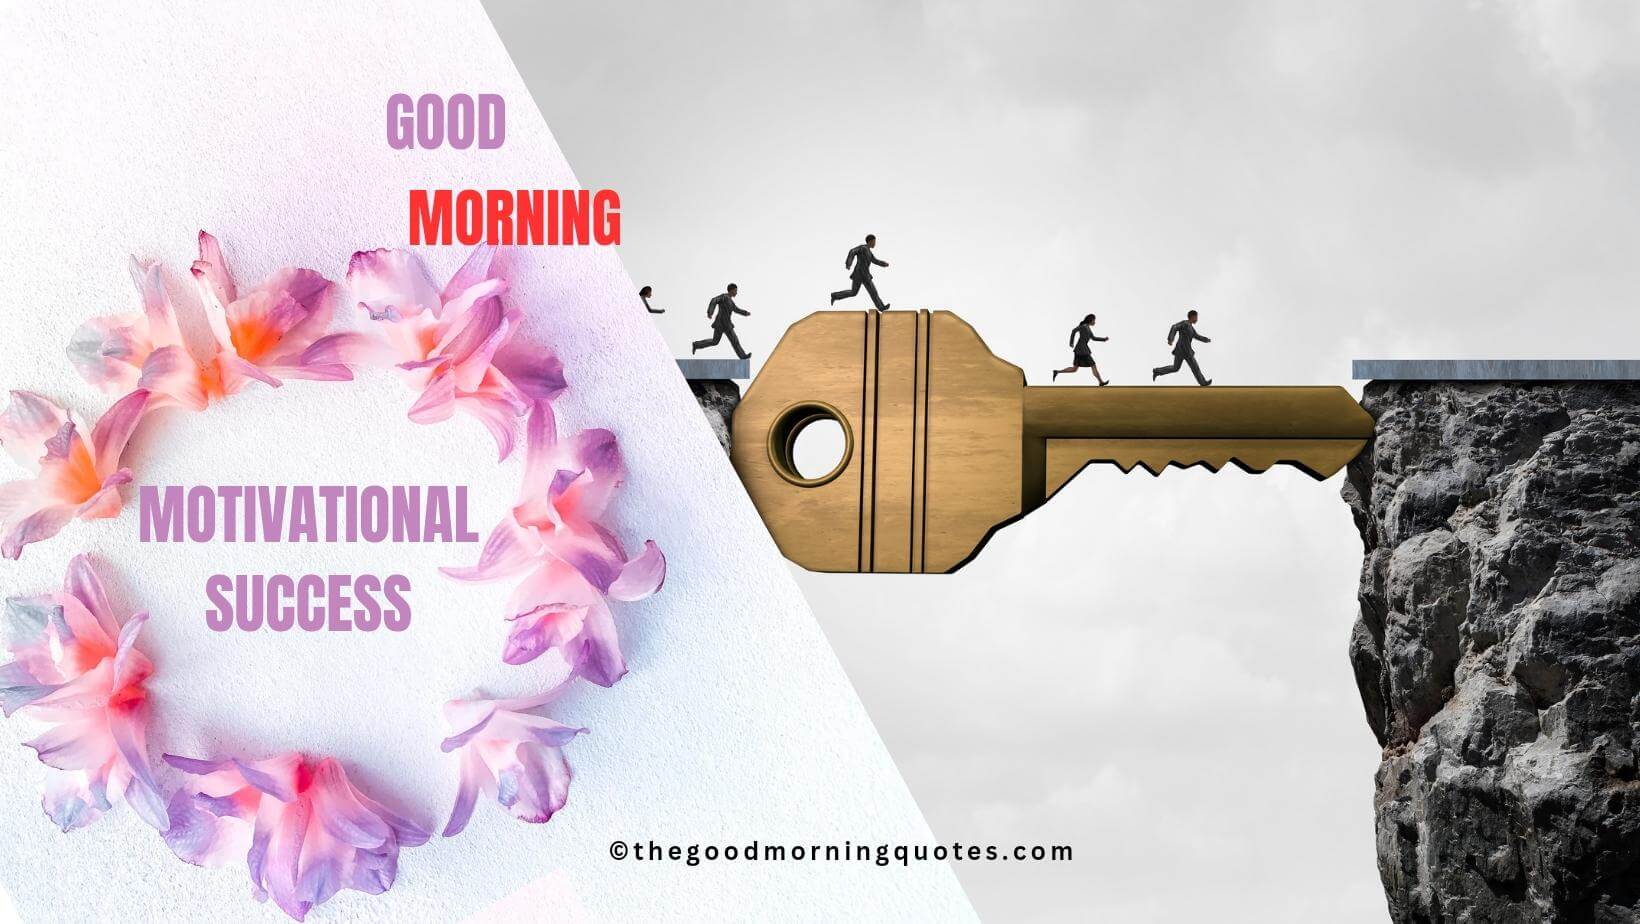 Good Morning Motivational Quotes in Hindi on Success